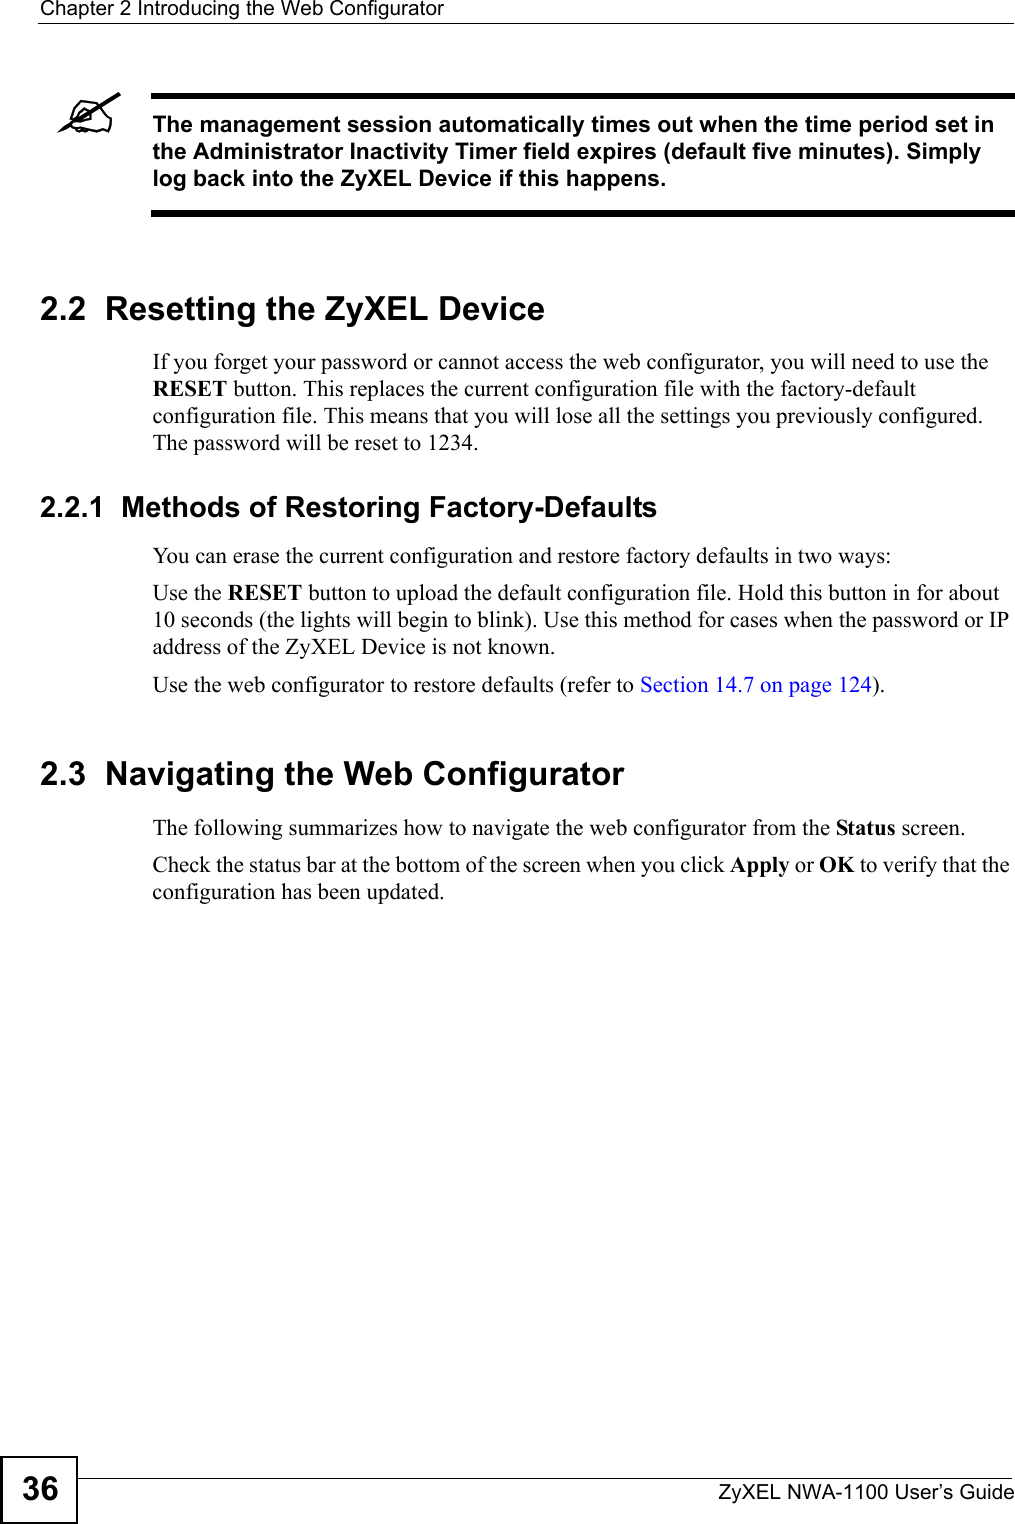 Chapter 2 Introducing the Web ConfiguratorZyXEL NWA-1100 User’s Guide36&quot;The management session automatically times out when the time period set in the Administrator Inactivity Timer field expires (default five minutes). Simply log back into the ZyXEL Device if this happens.2.2  Resetting the ZyXEL DeviceIf you forget your password or cannot access the web configurator, you will need to use the RESET button. This replaces the current configuration file with the factory-default configuration file. This means that you will lose all the settings you previously configured. The password will be reset to 1234.2.2.1  Methods of Restoring Factory-DefaultsYou can erase the current configuration and restore factory defaults in two ways:Use the RESET button to upload the default configuration file. Hold this button in for about 10 seconds (the lights will begin to blink). Use this method for cases when the password or IP address of the ZyXEL Device is not known.Use the web configurator to restore defaults (refer to Section 14.7 on page 124).2.3  Navigating the Web ConfiguratorThe following summarizes how to navigate the web configurator from the Status screen.Check the status bar at the bottom of the screen when you click Apply or OK to verify that the configuration has been updated.